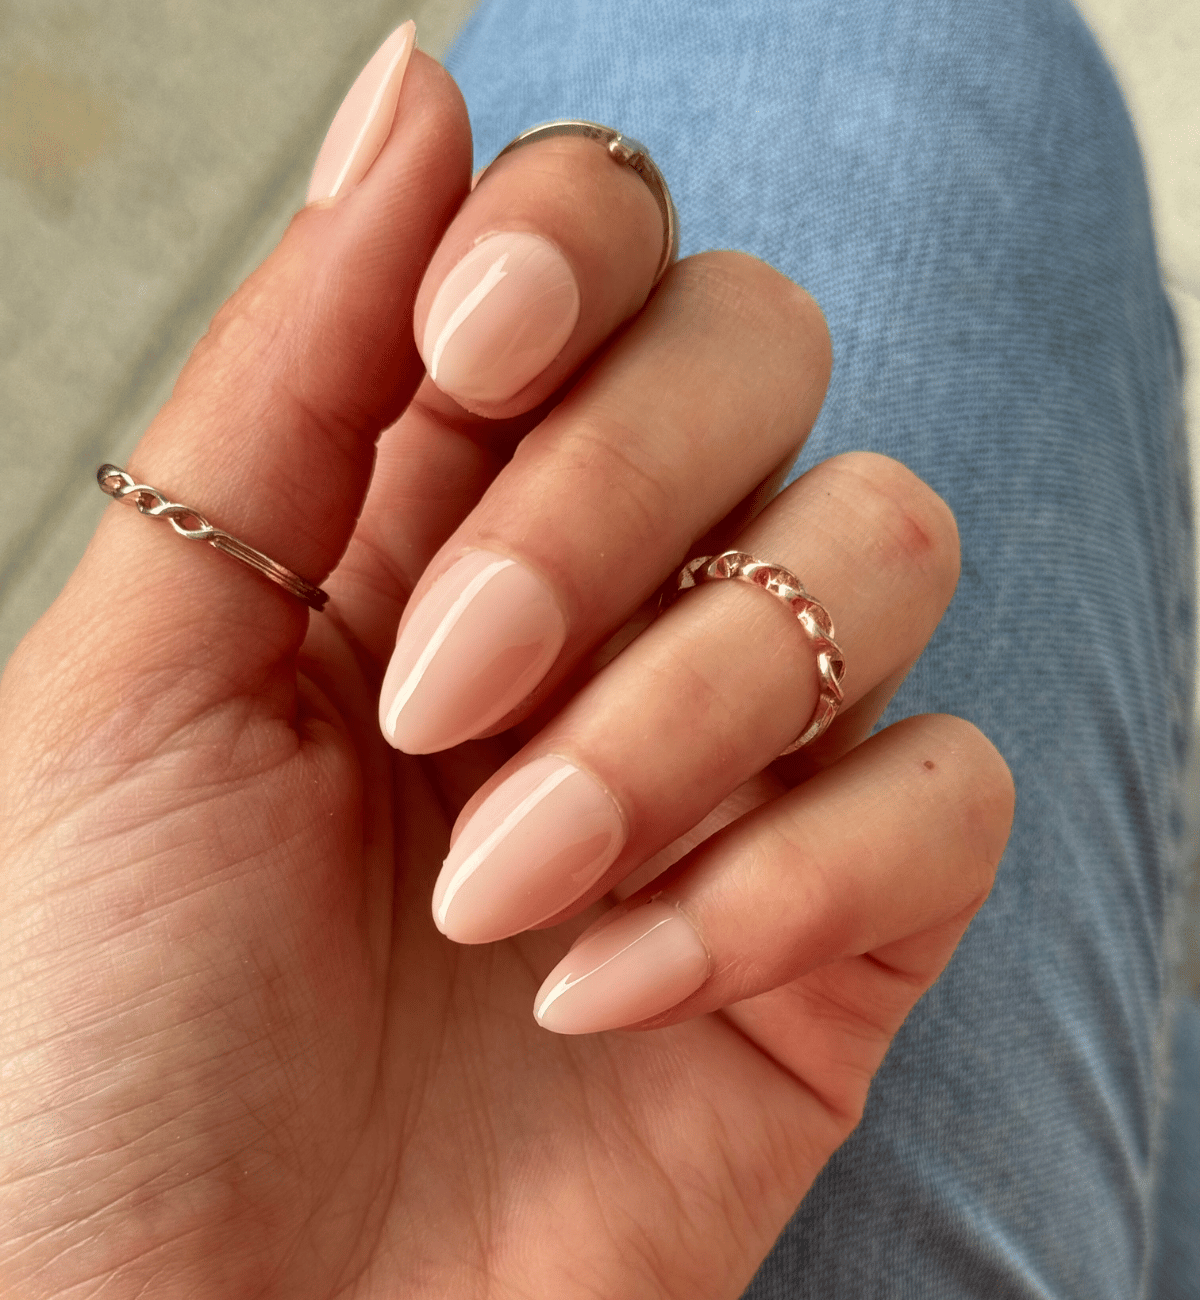 FAUX ONGLES ABRICOT NUDE AMANDE COURT